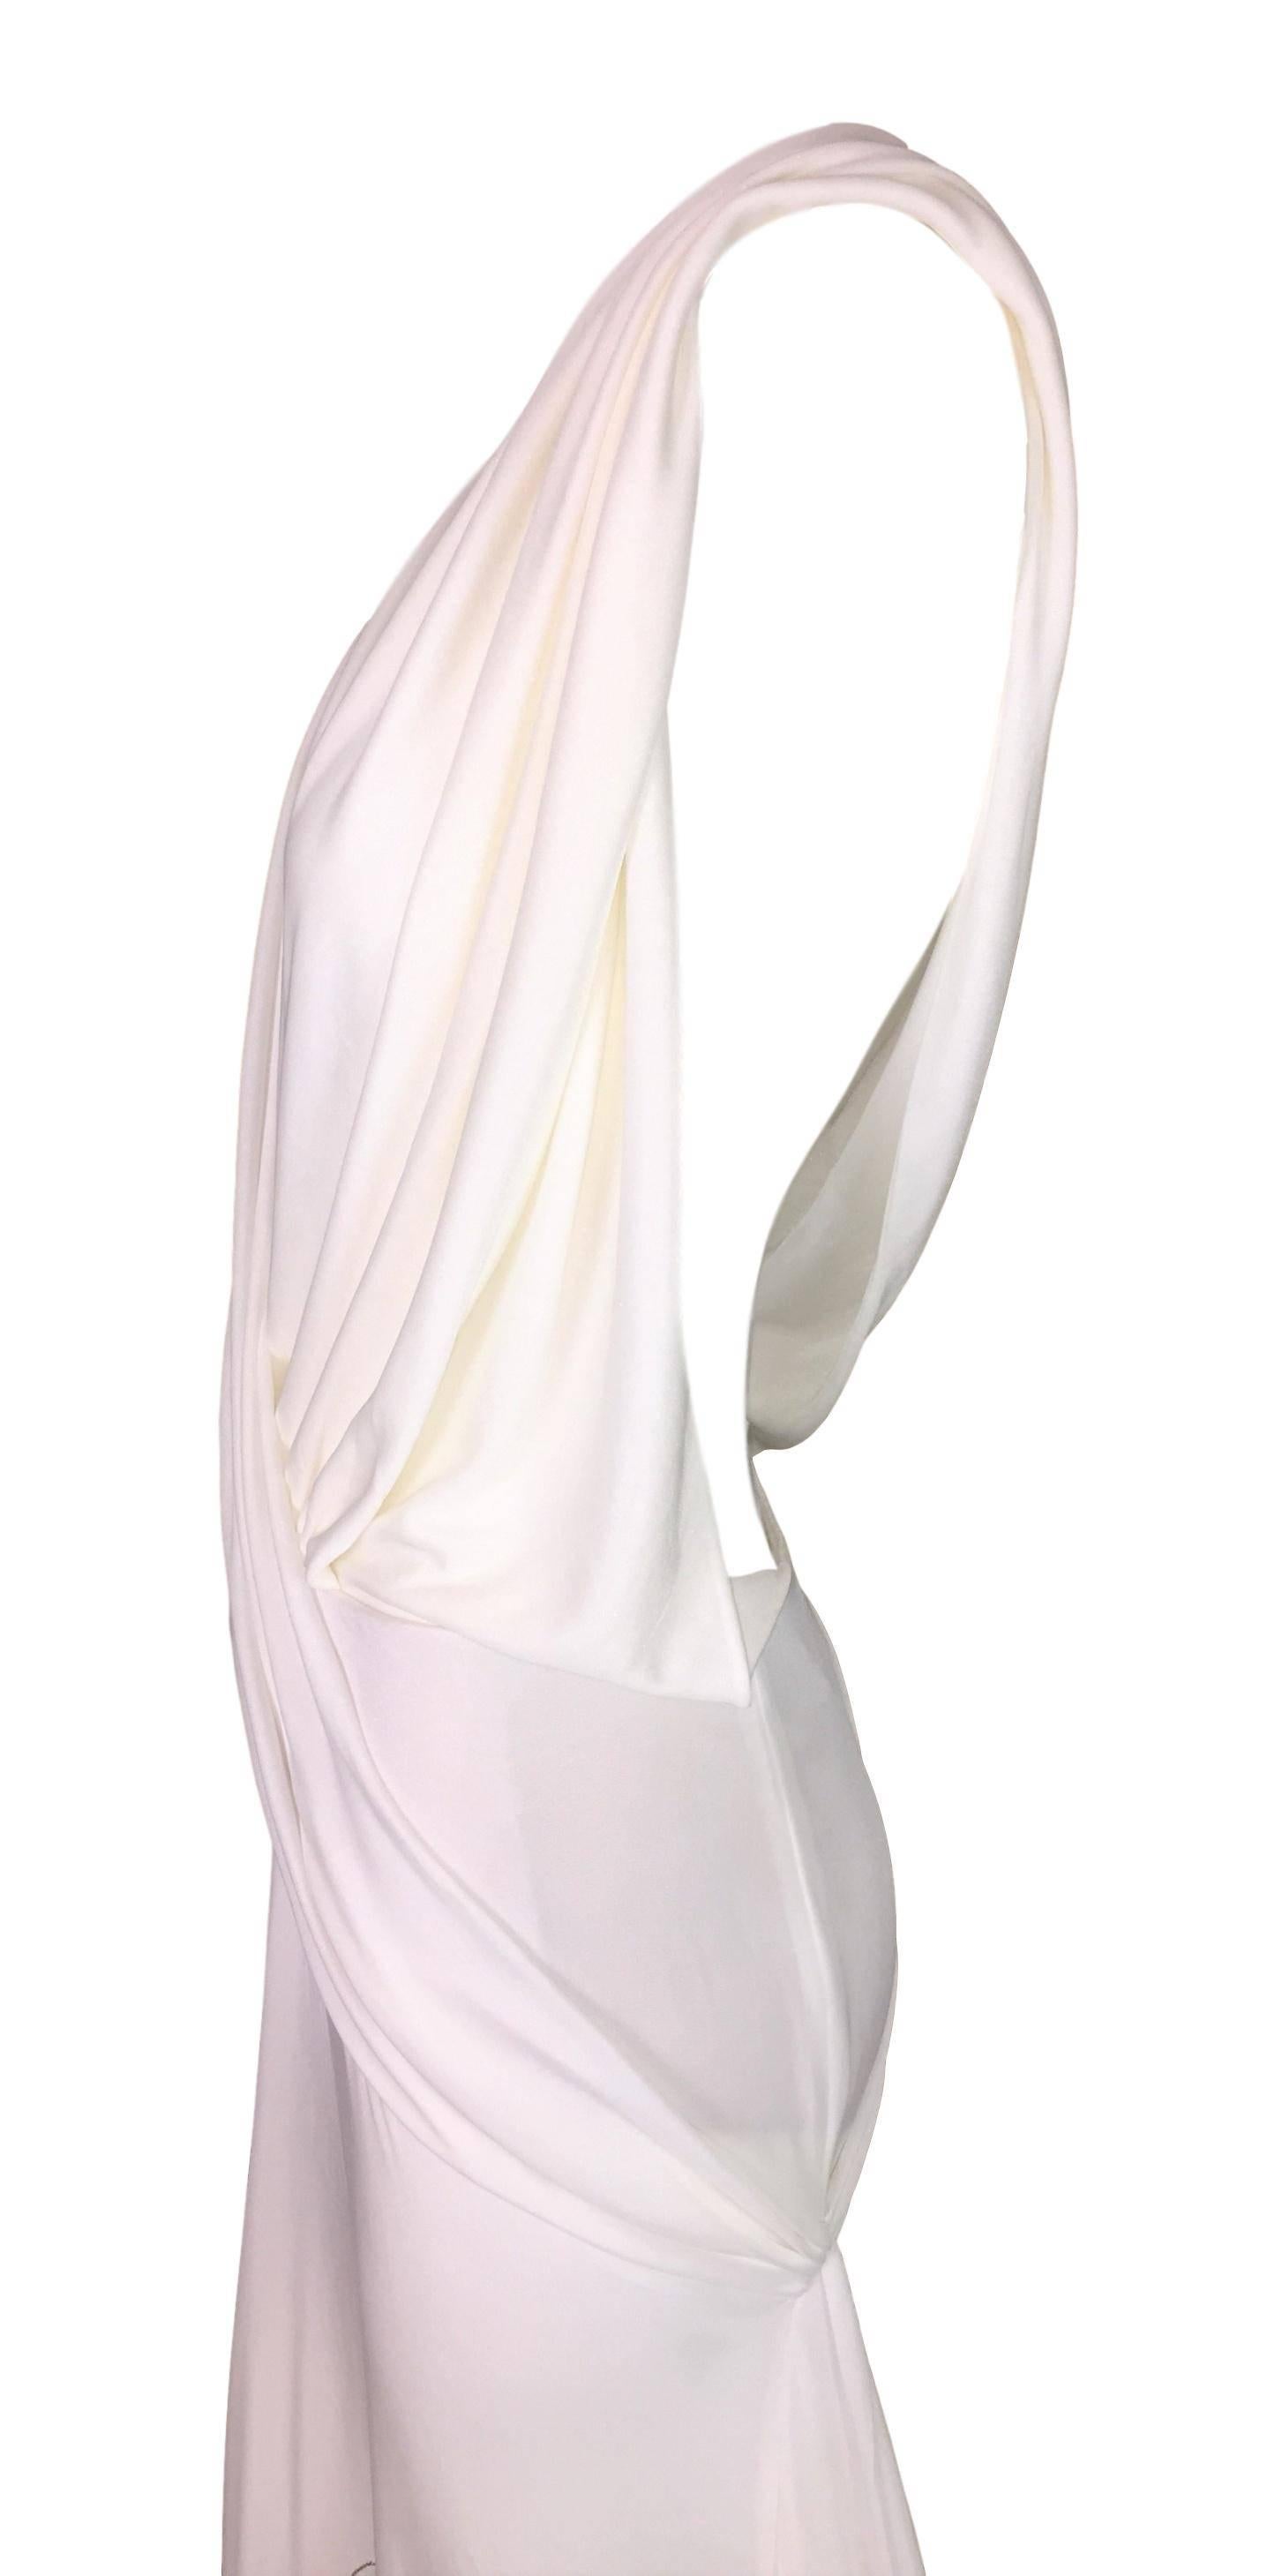 Gray F/W 1999 Atelier Versace Sheer White Plunging Beaded Medusa Gown Dress